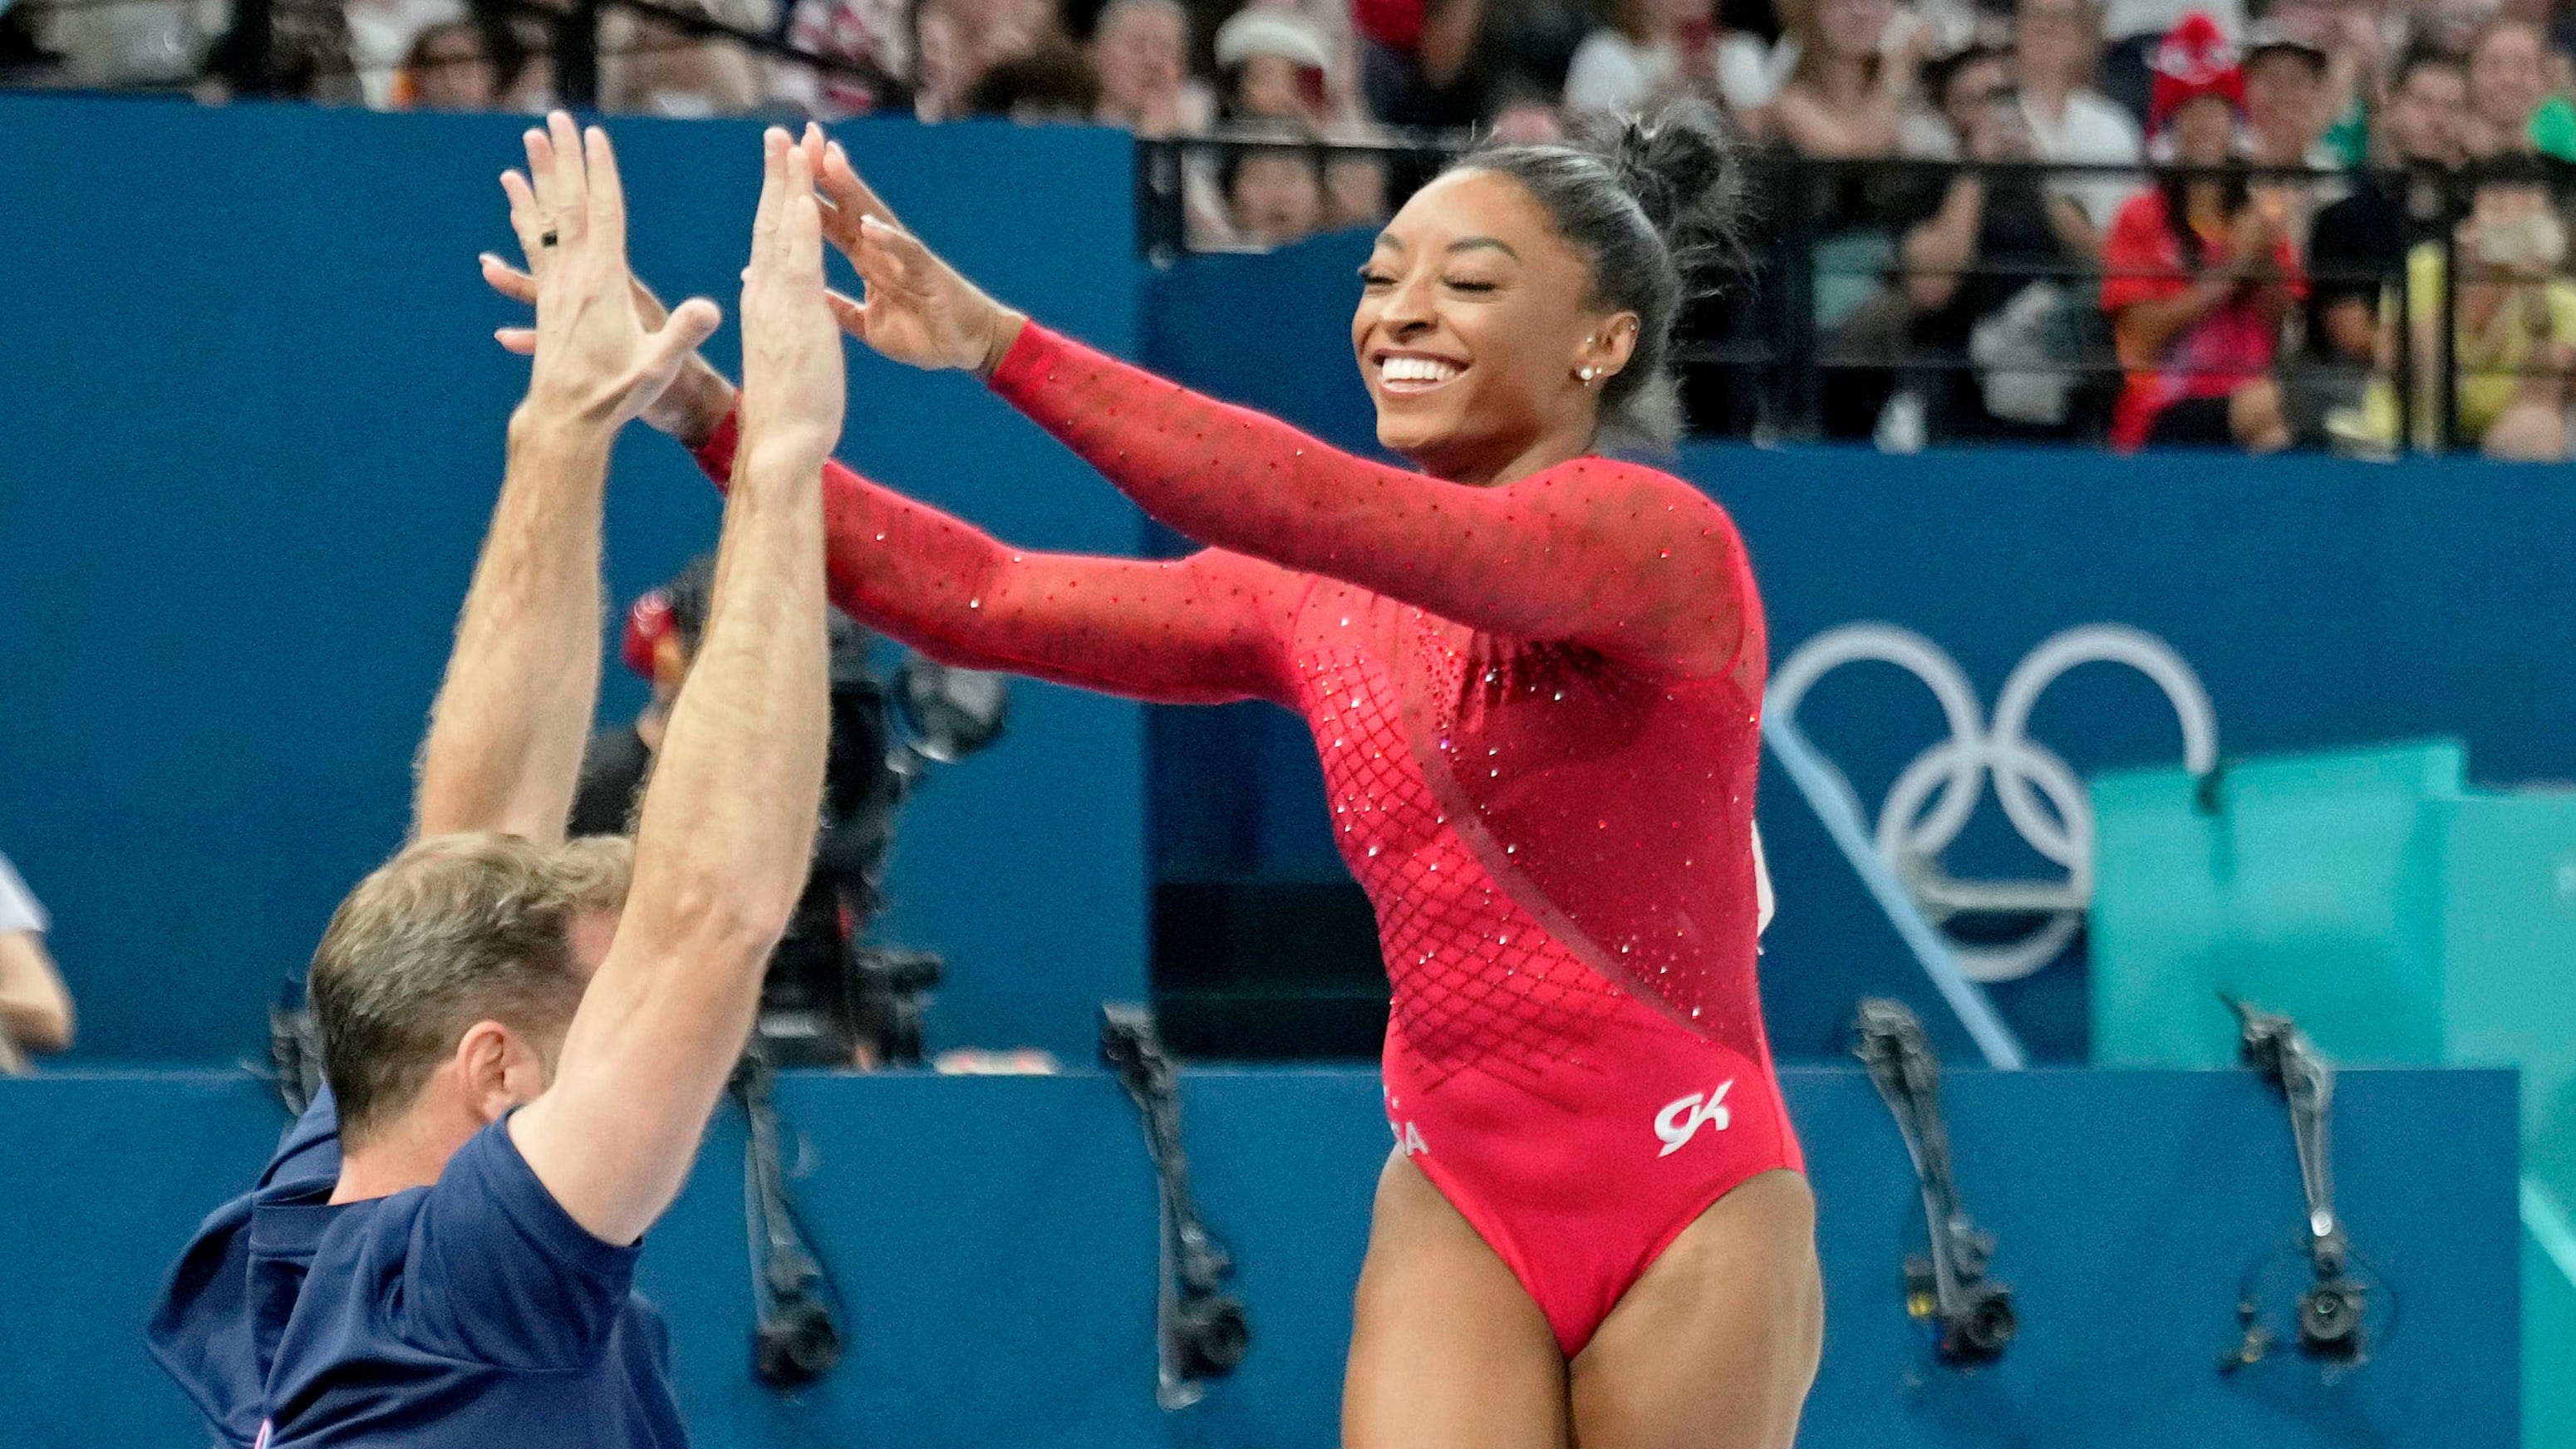 How did Simone Biles do today? Star gymnast adds another gold in vault final